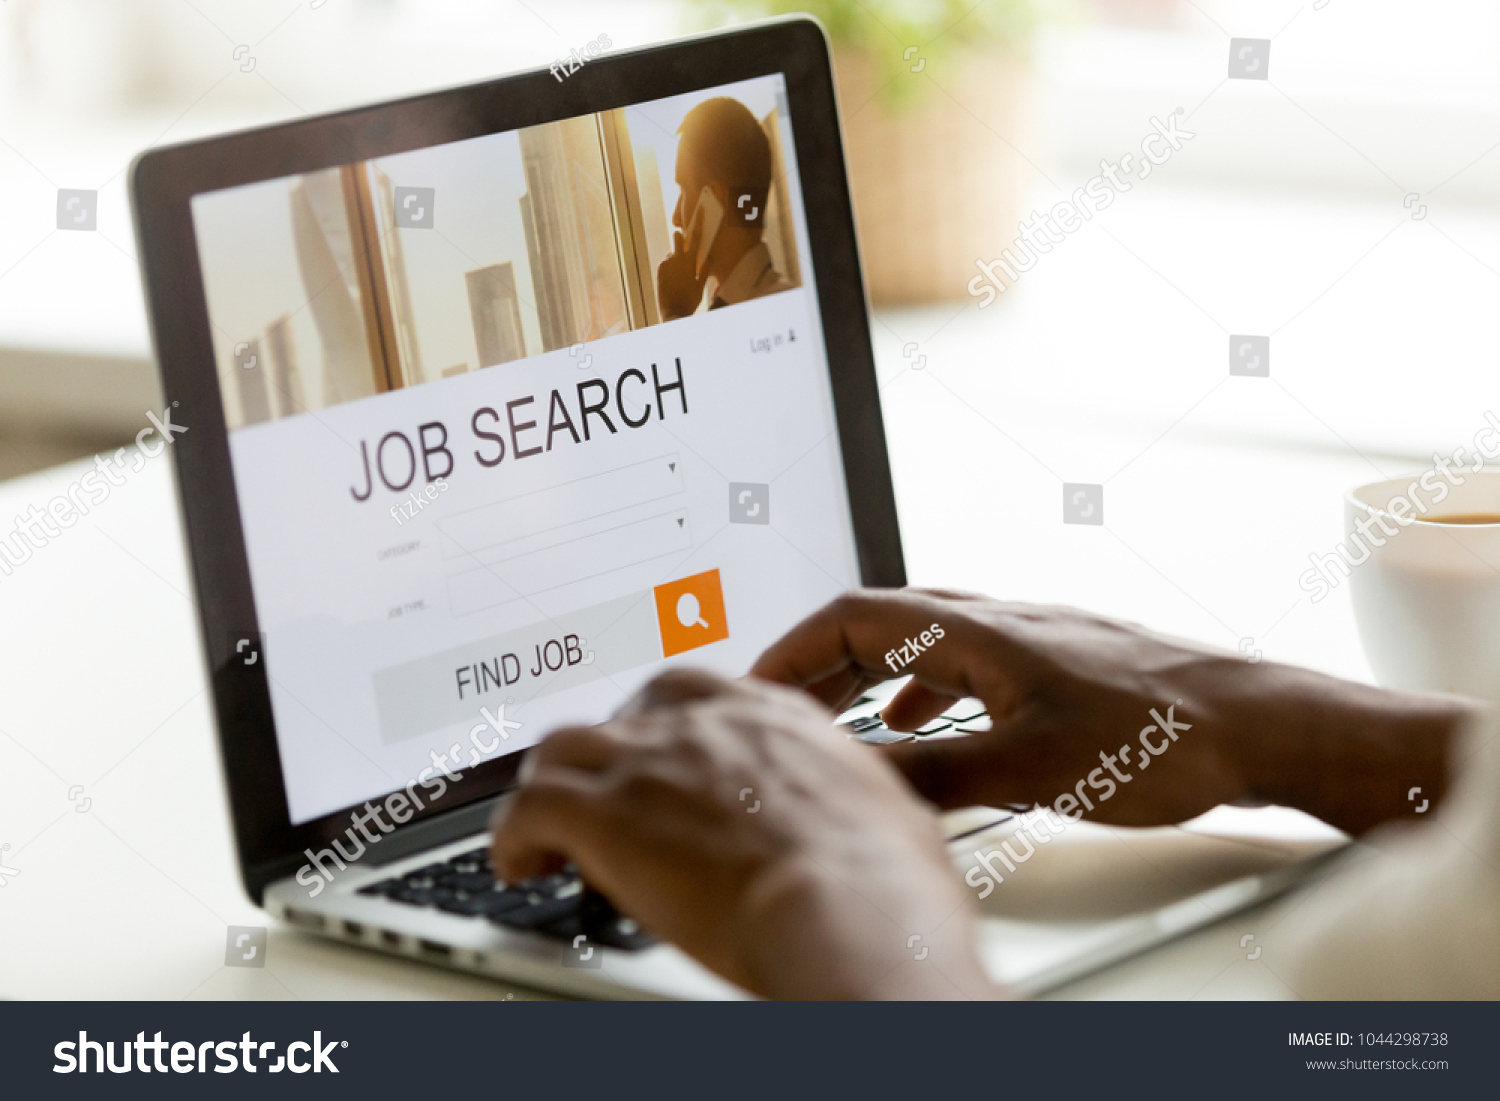 African man browsing work opportunities online using job search computer app, black jobless seeker looking for new vacancies on website page at laptop screen, recruitment concept, rear close up view #1044298738